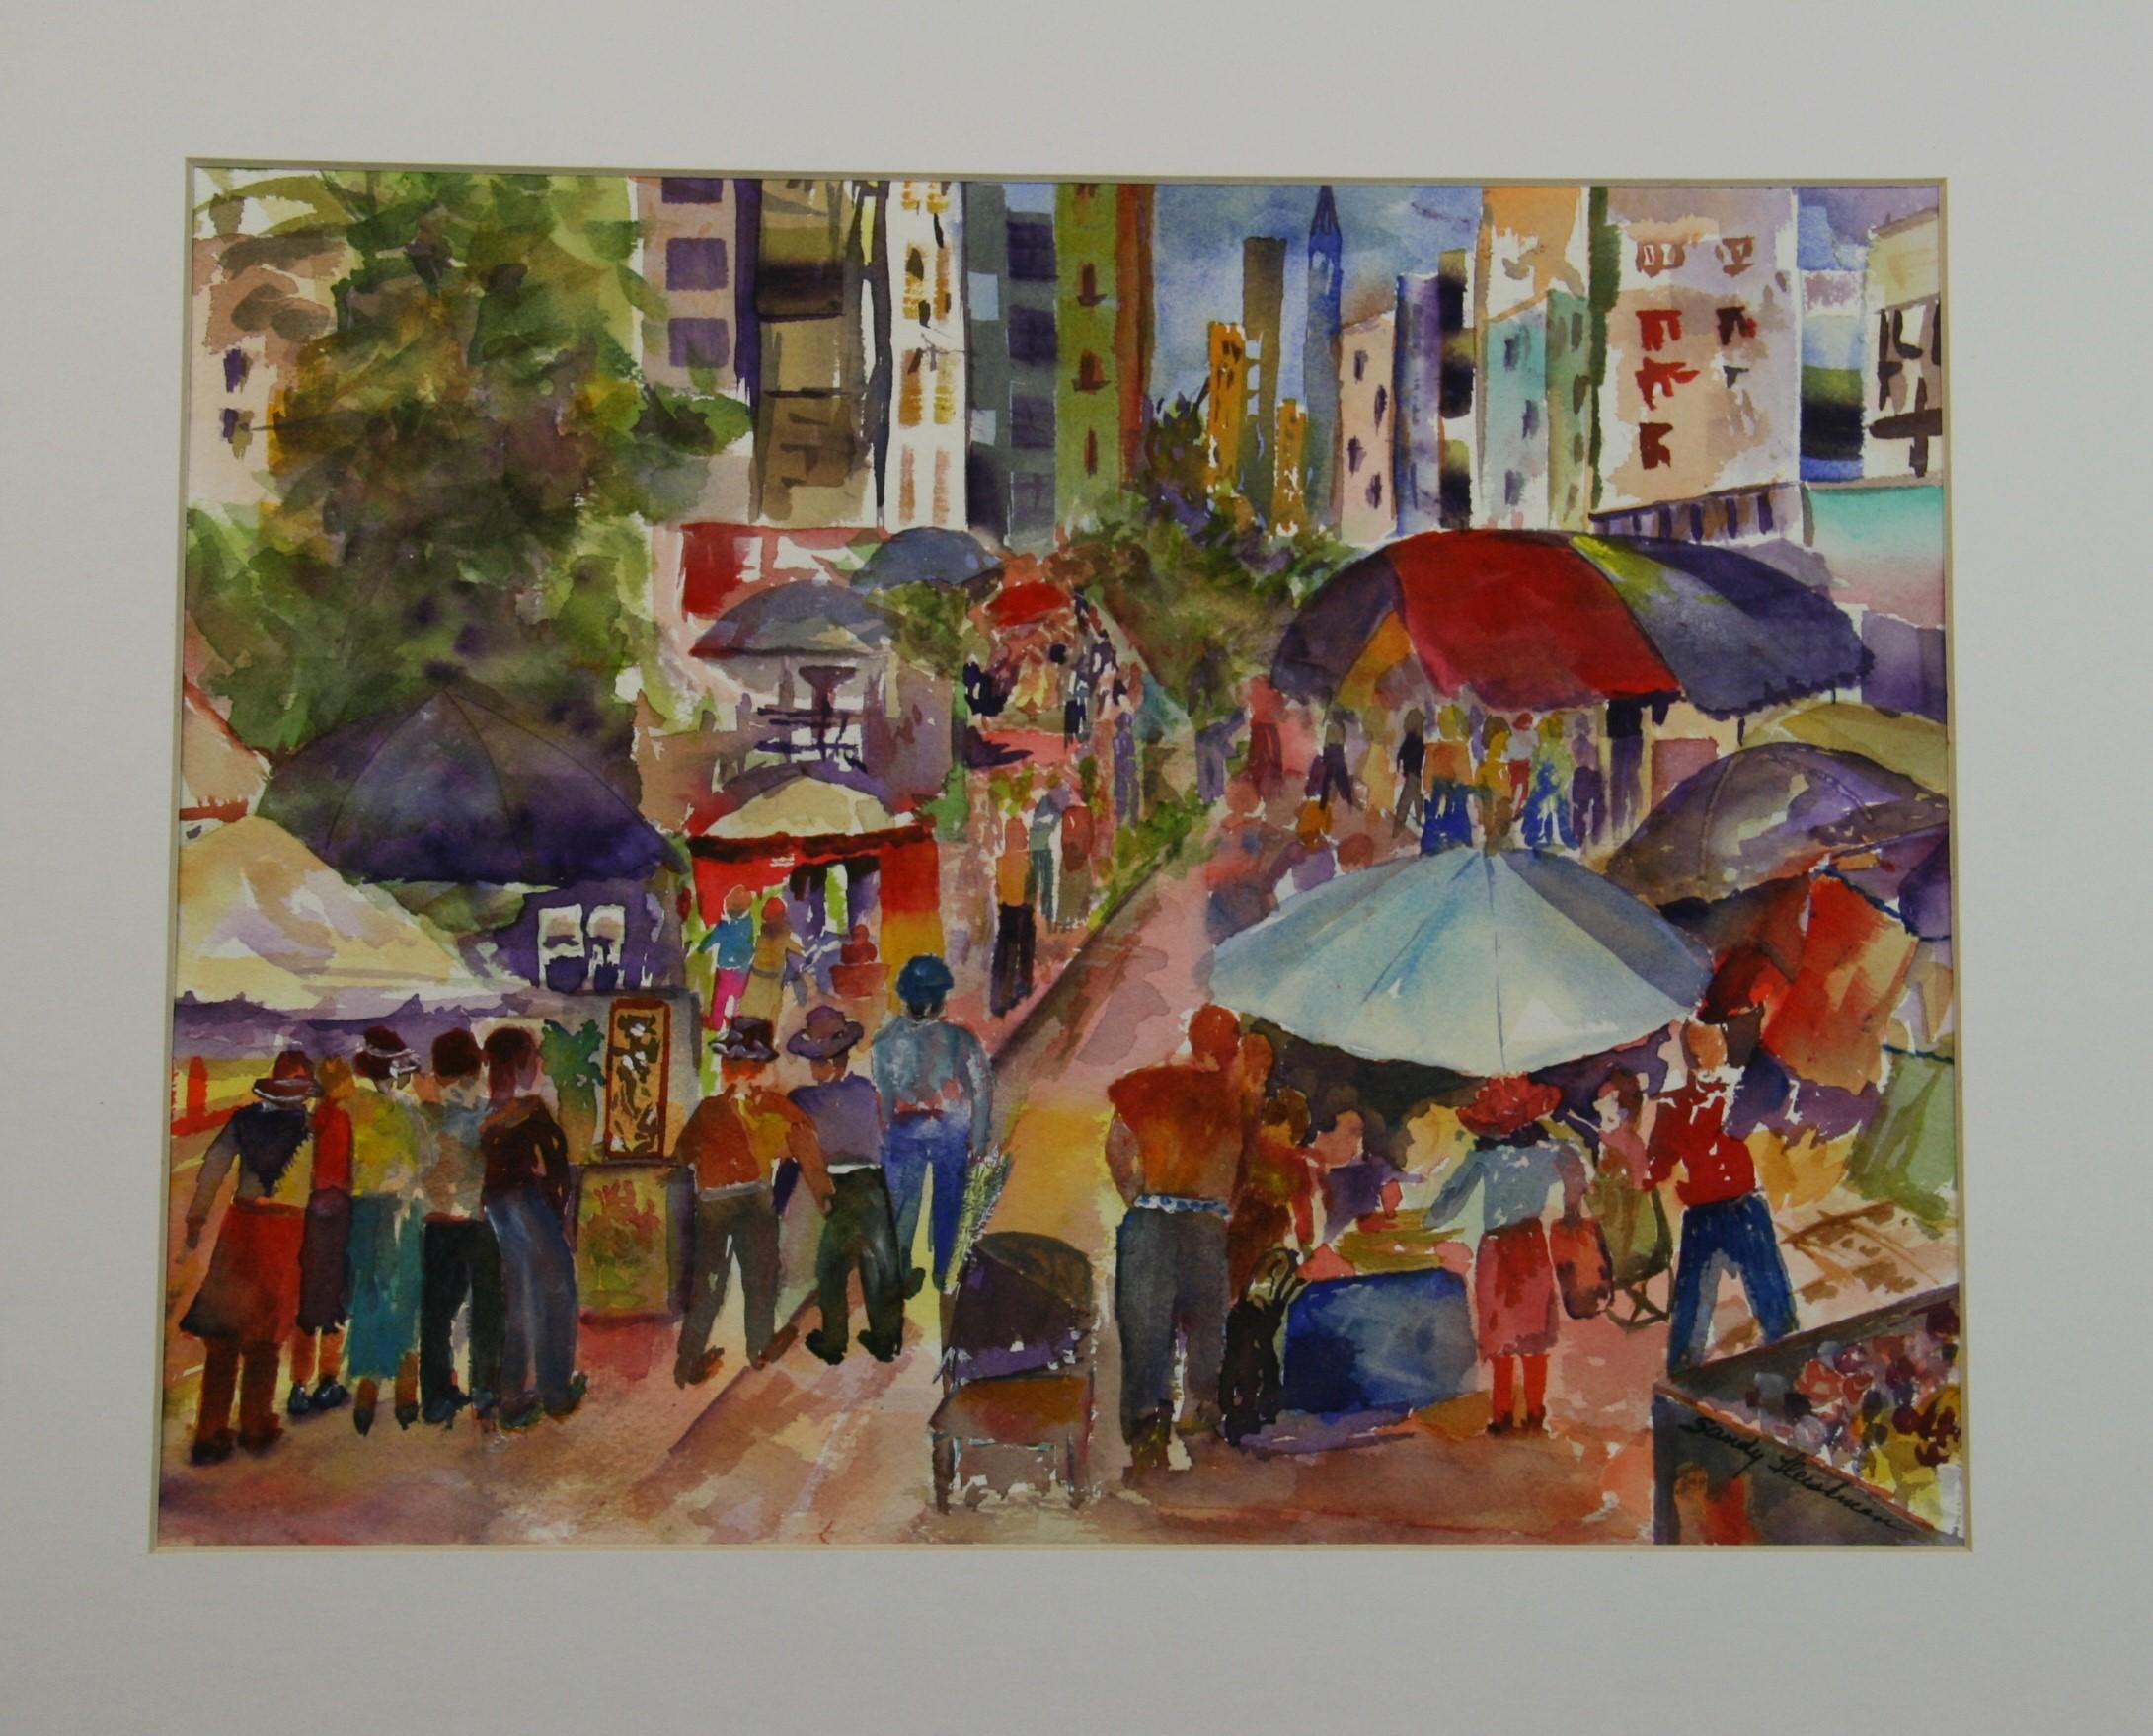 3863 Lower Manhattan street fair acrylic painting on paper in a mat
Image size 10.5x13.56